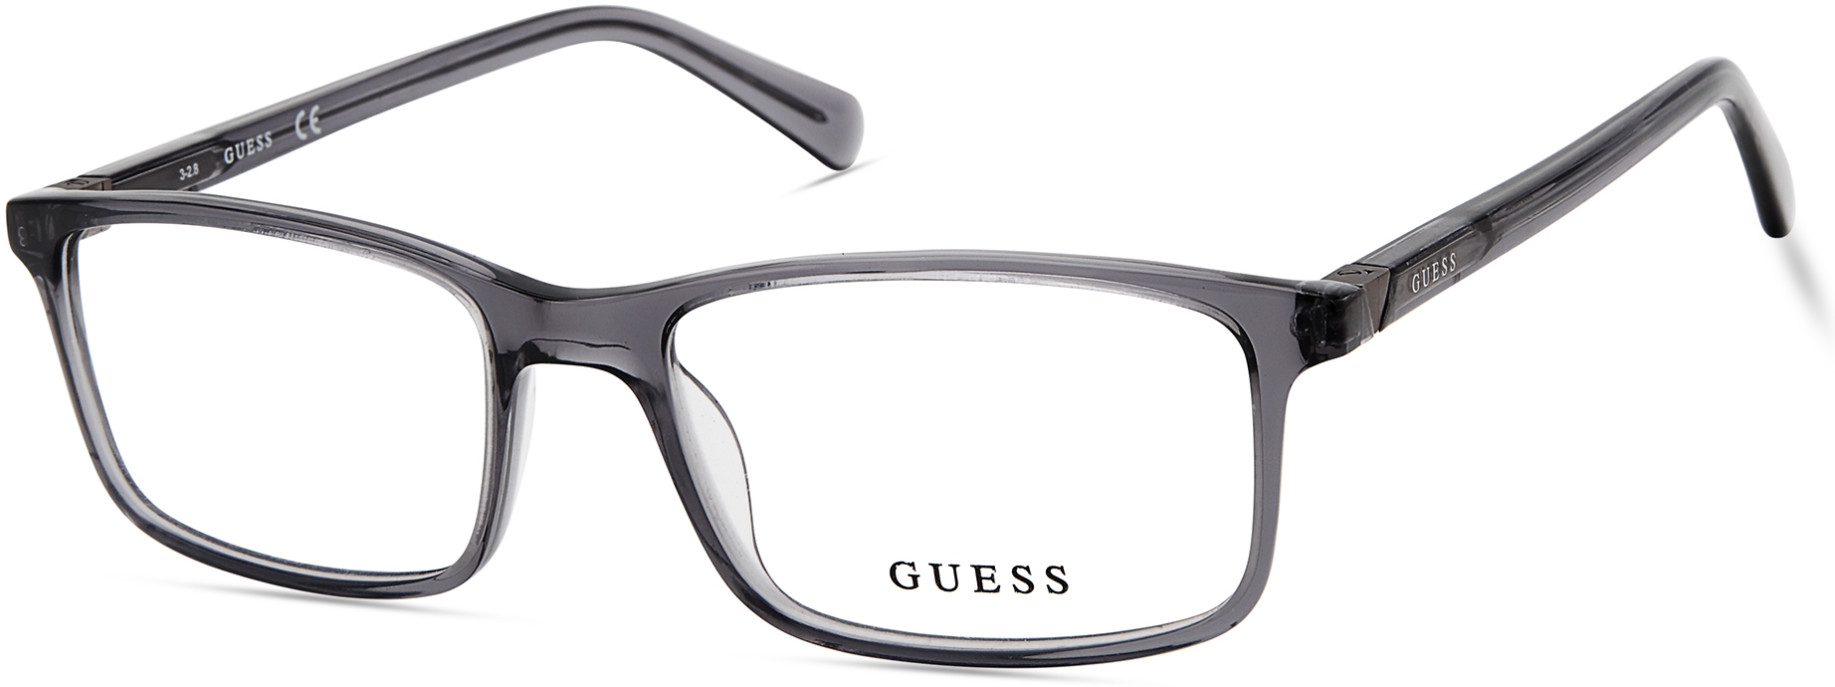 GUESS 1948 027